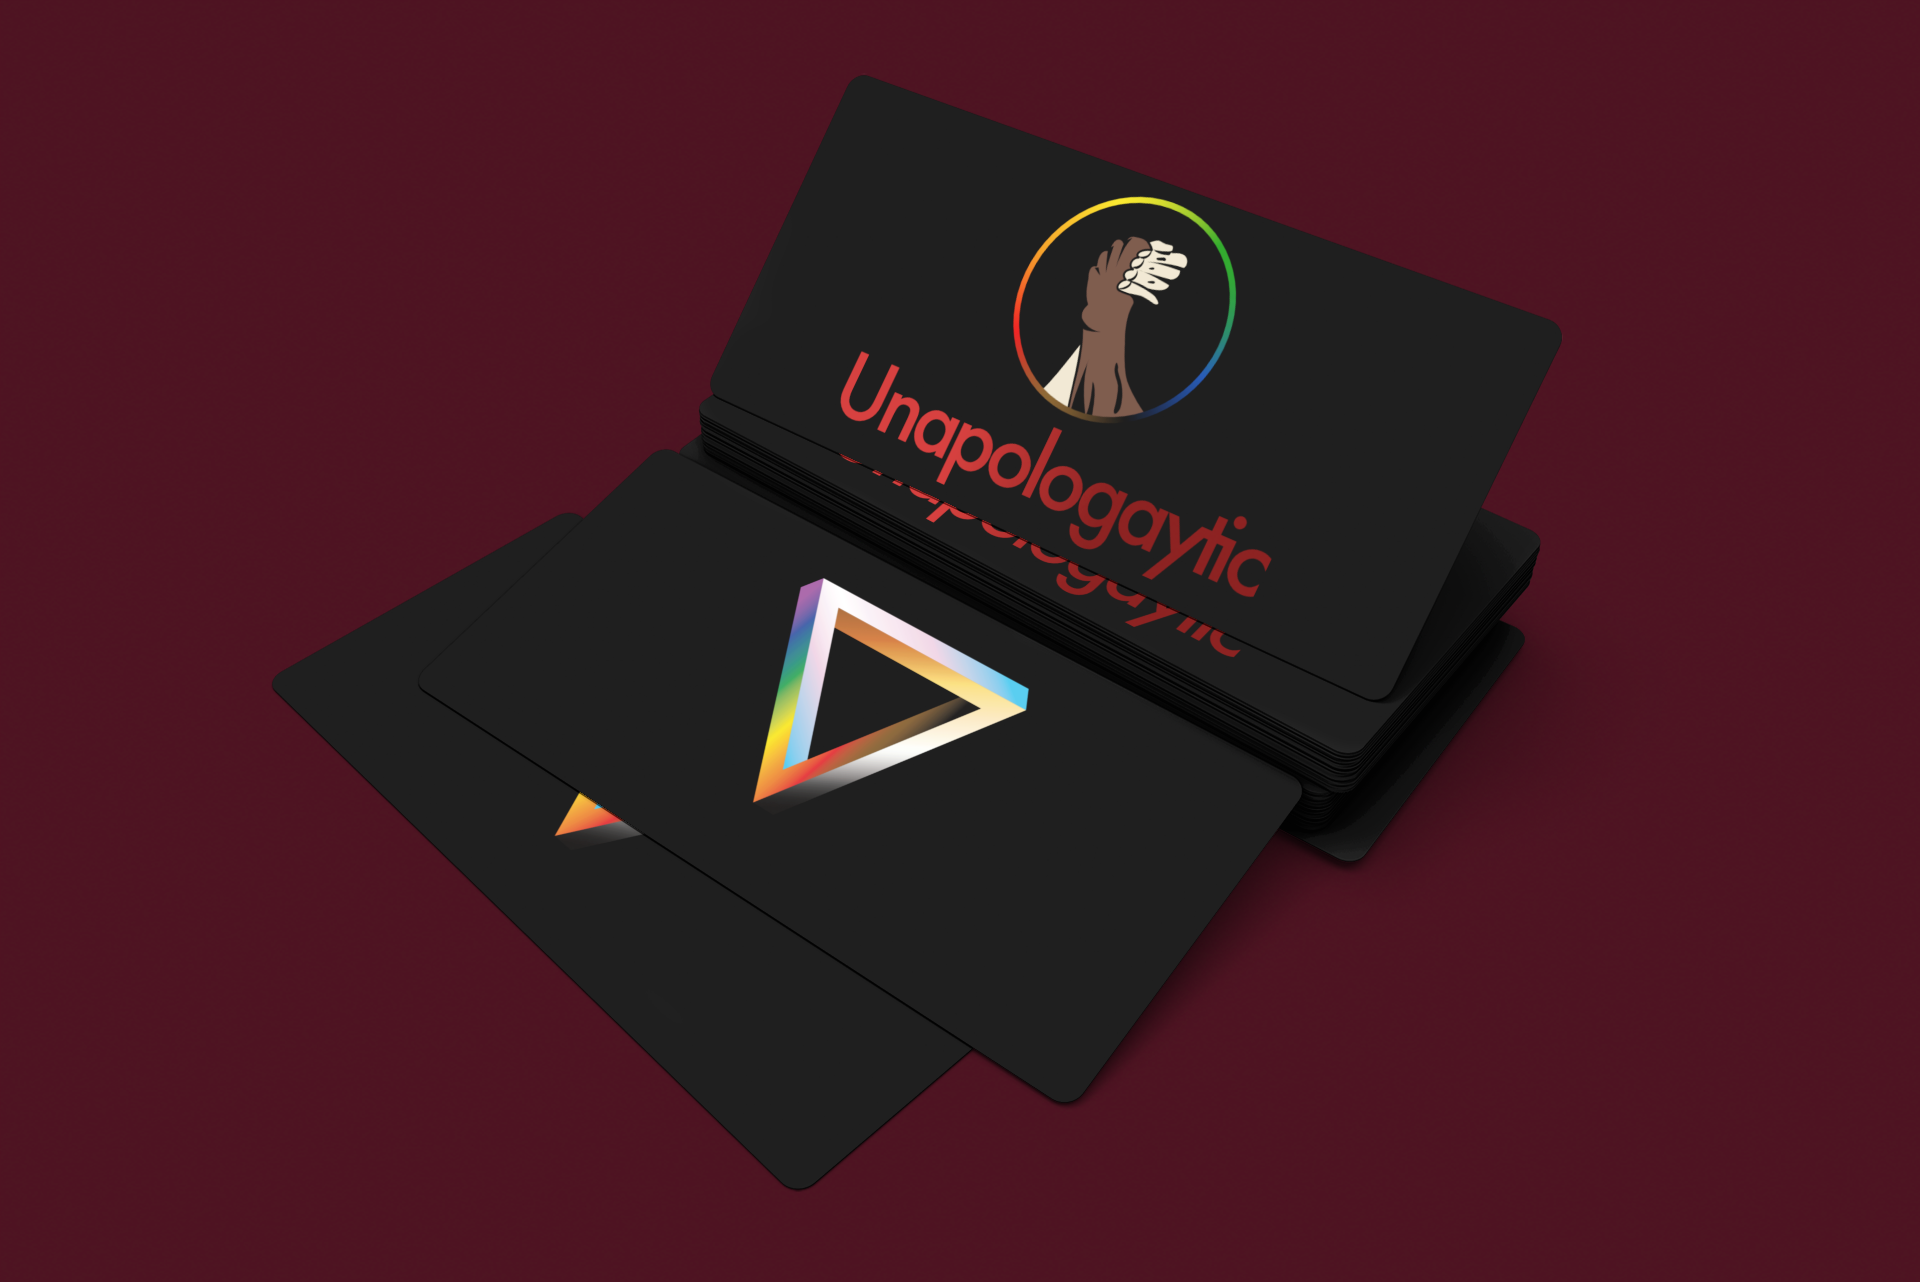 Unapologaytic gift cards ranging from £5 to £40. Available instantly exclusively on unapologaytic.com. Personalised gift messages can also be added to any order at the time of purchase.